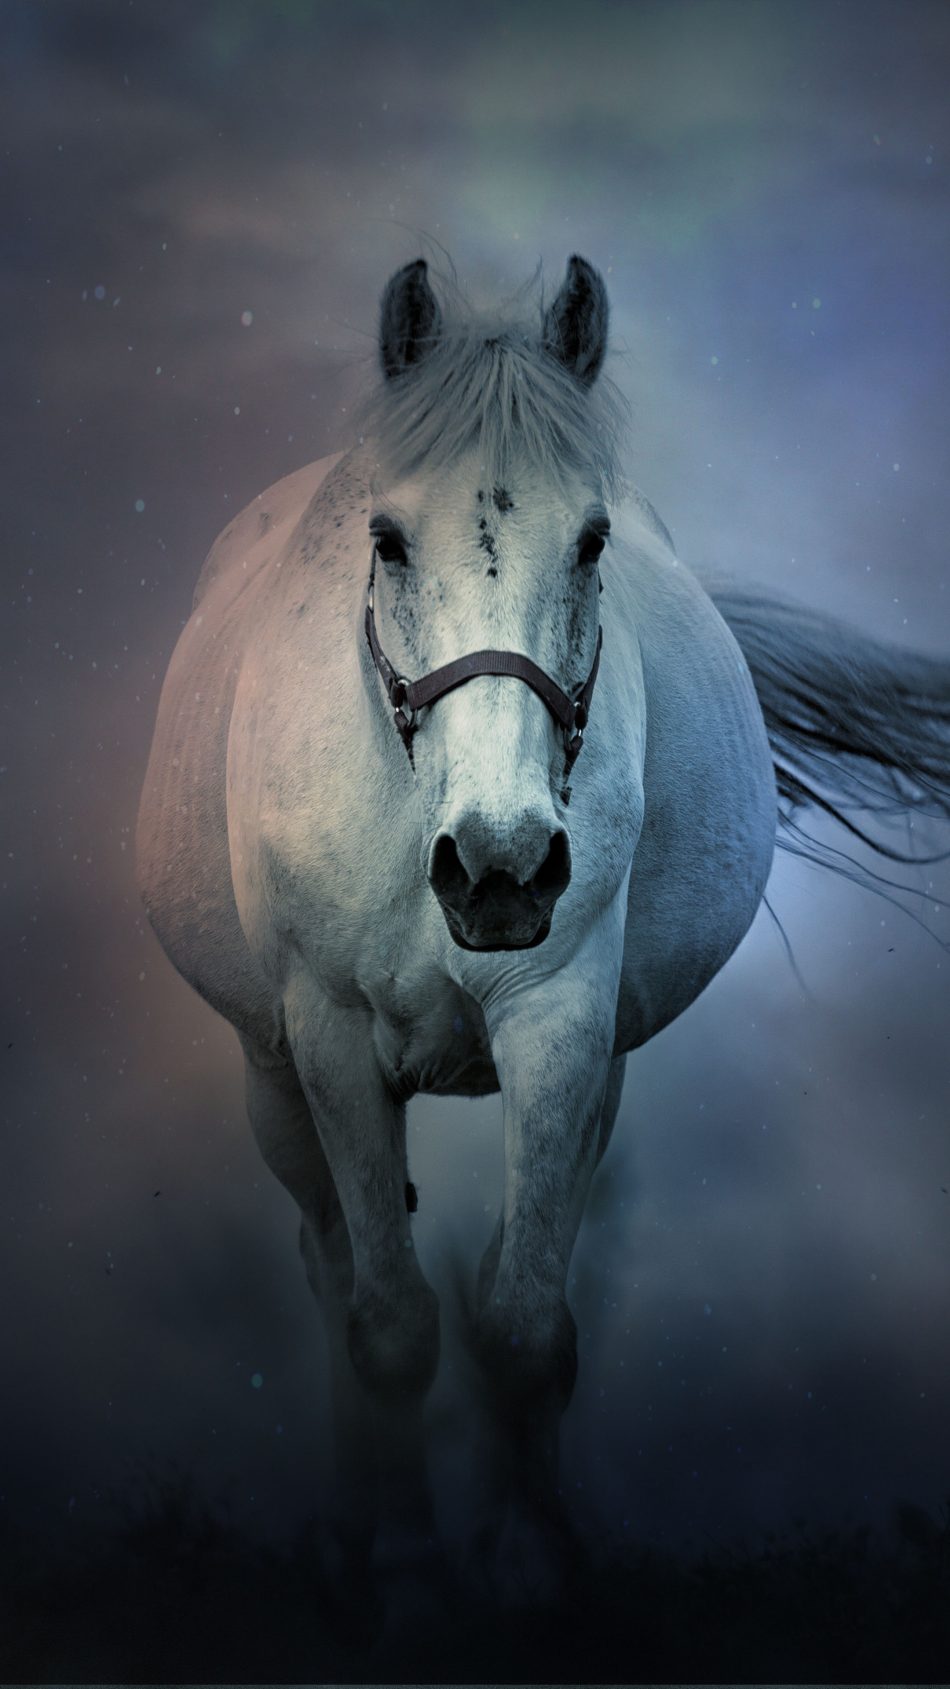 Horse For Phone Wallpapers